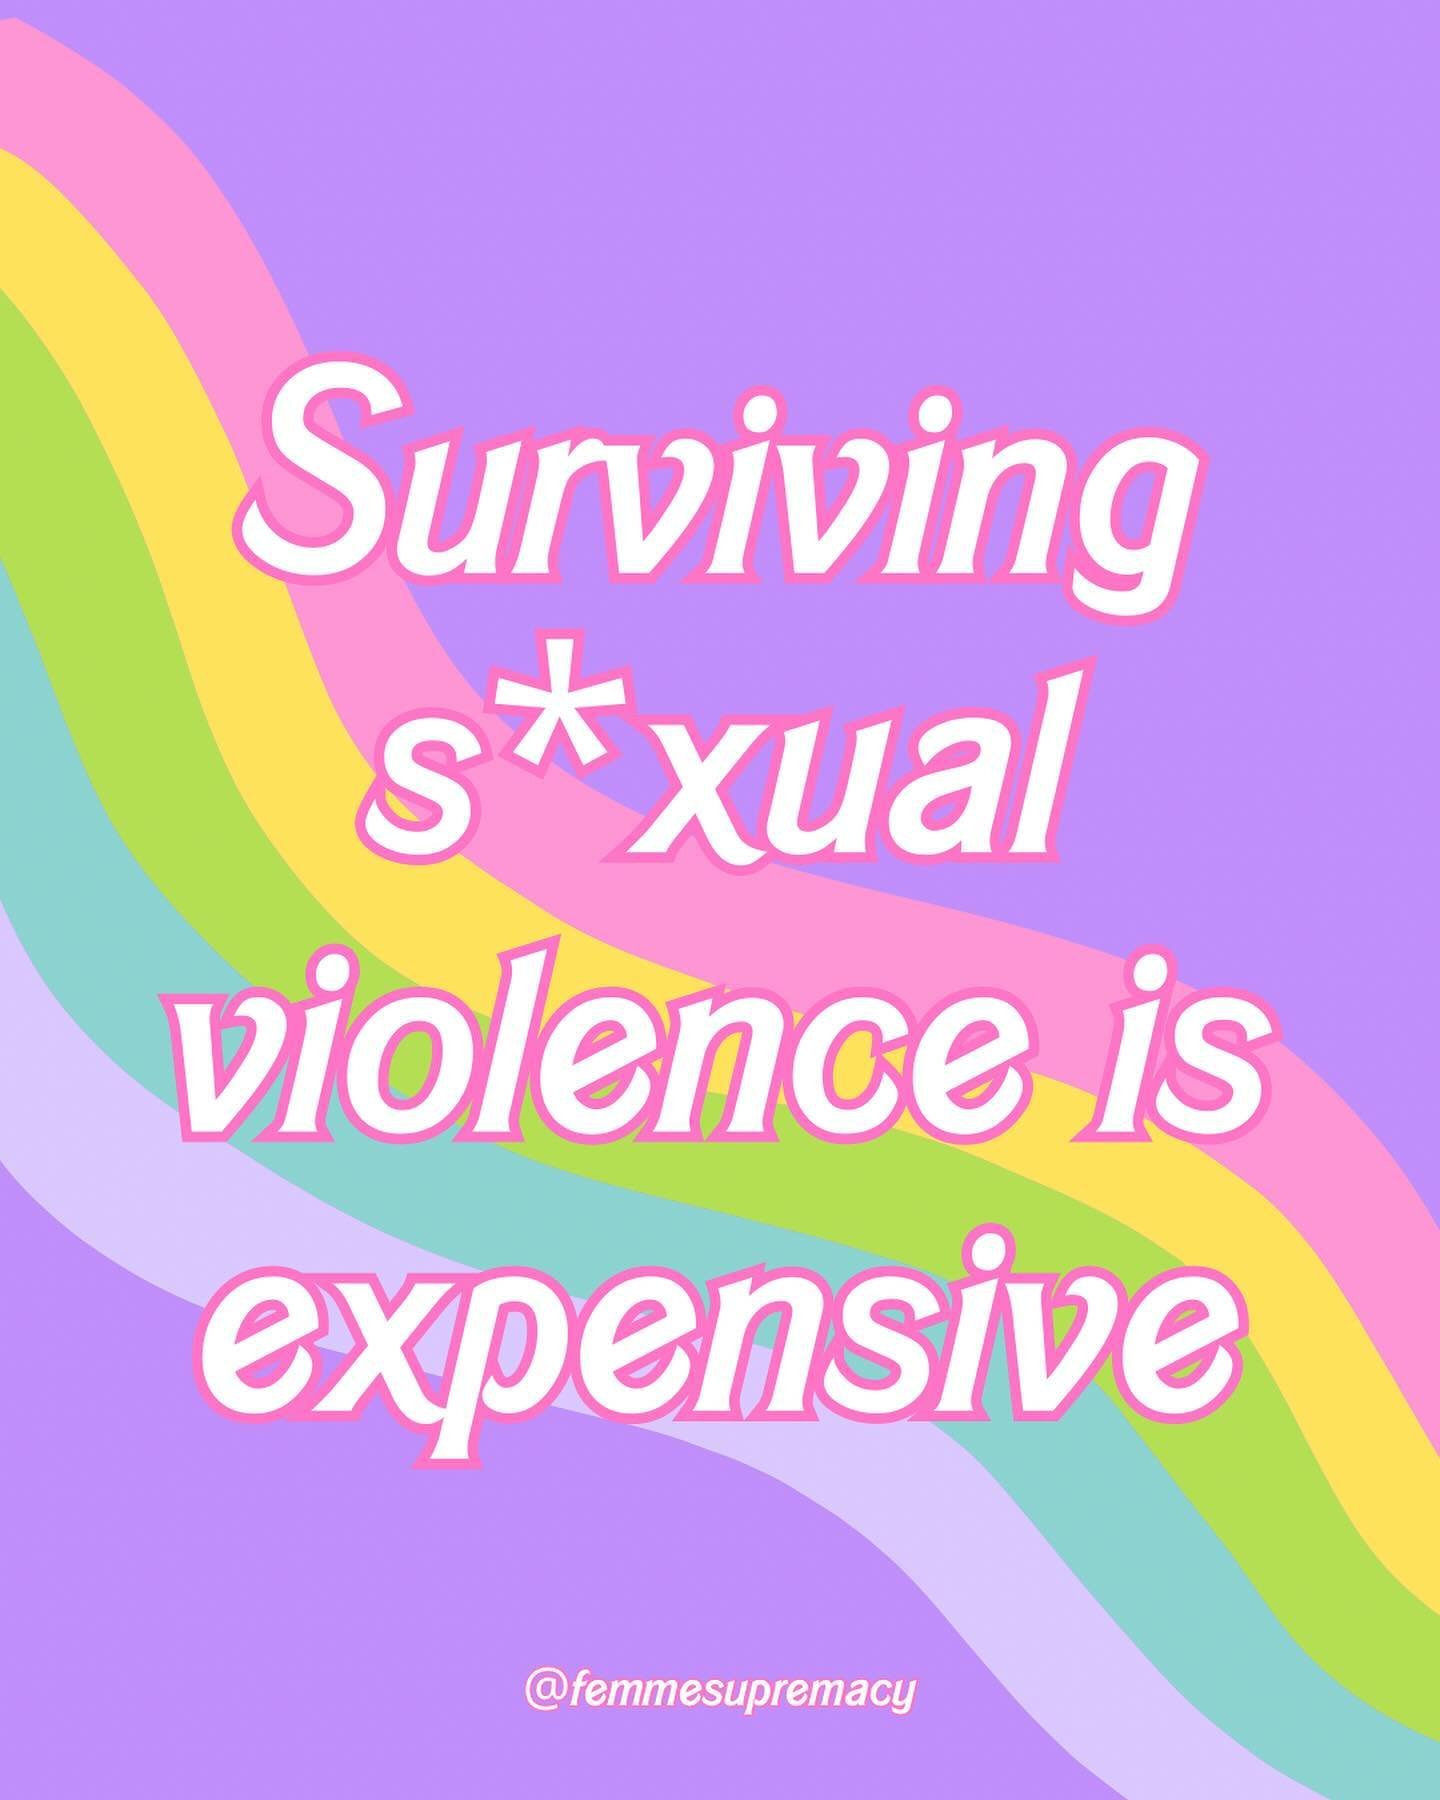 surviving s*xual violence is expensive 💸 the CDC estimates the lifetime cost of r*pe is 120k+...per victim 🙃 remember that supporting survivors can include financial solidarity 💕 because actually, cash can solve a lot of our problems 💞 if you're 